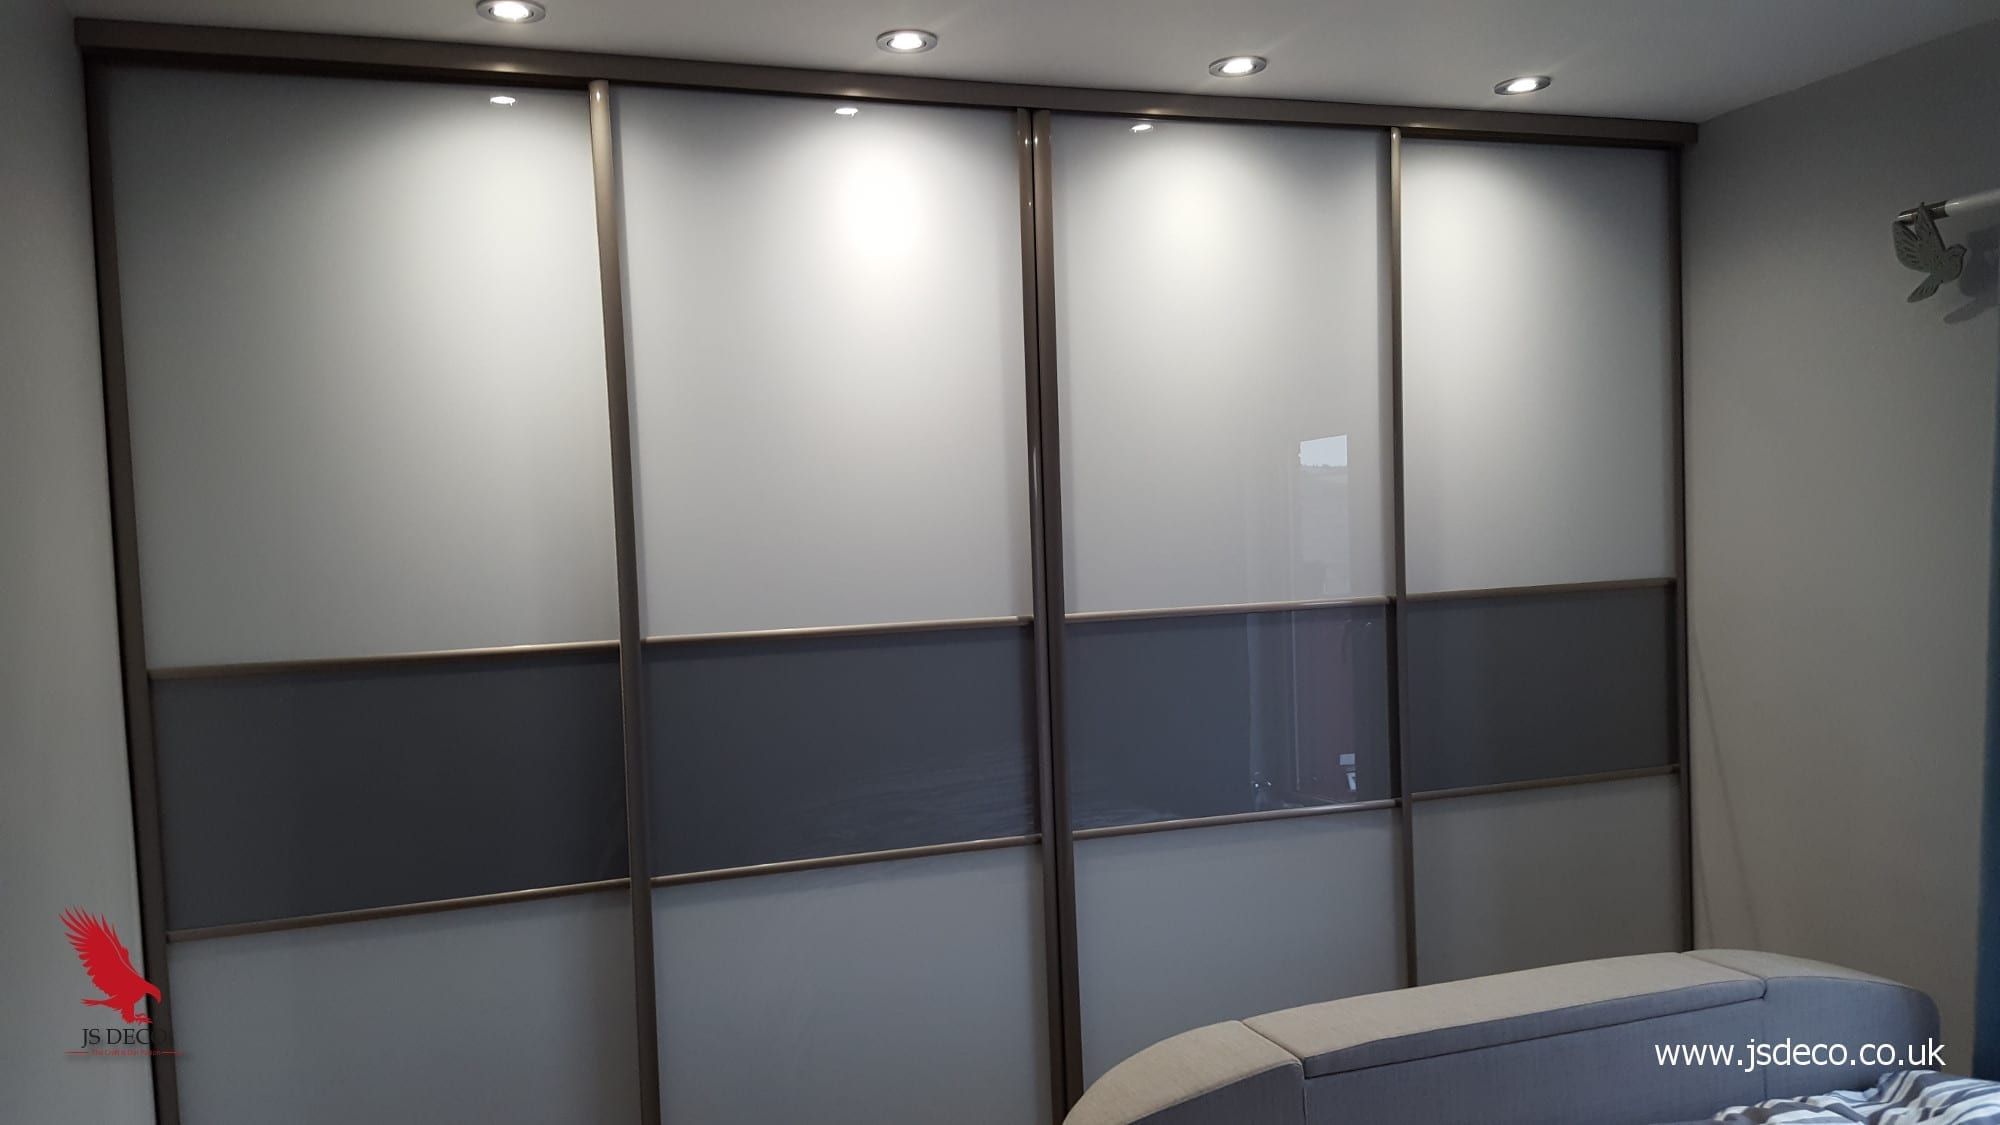 High Gloss Fitted Sliding Wardrobe Halifax | Js Deco Pertaining To High Gloss Sliding Wardrobes (View 8 of 15)